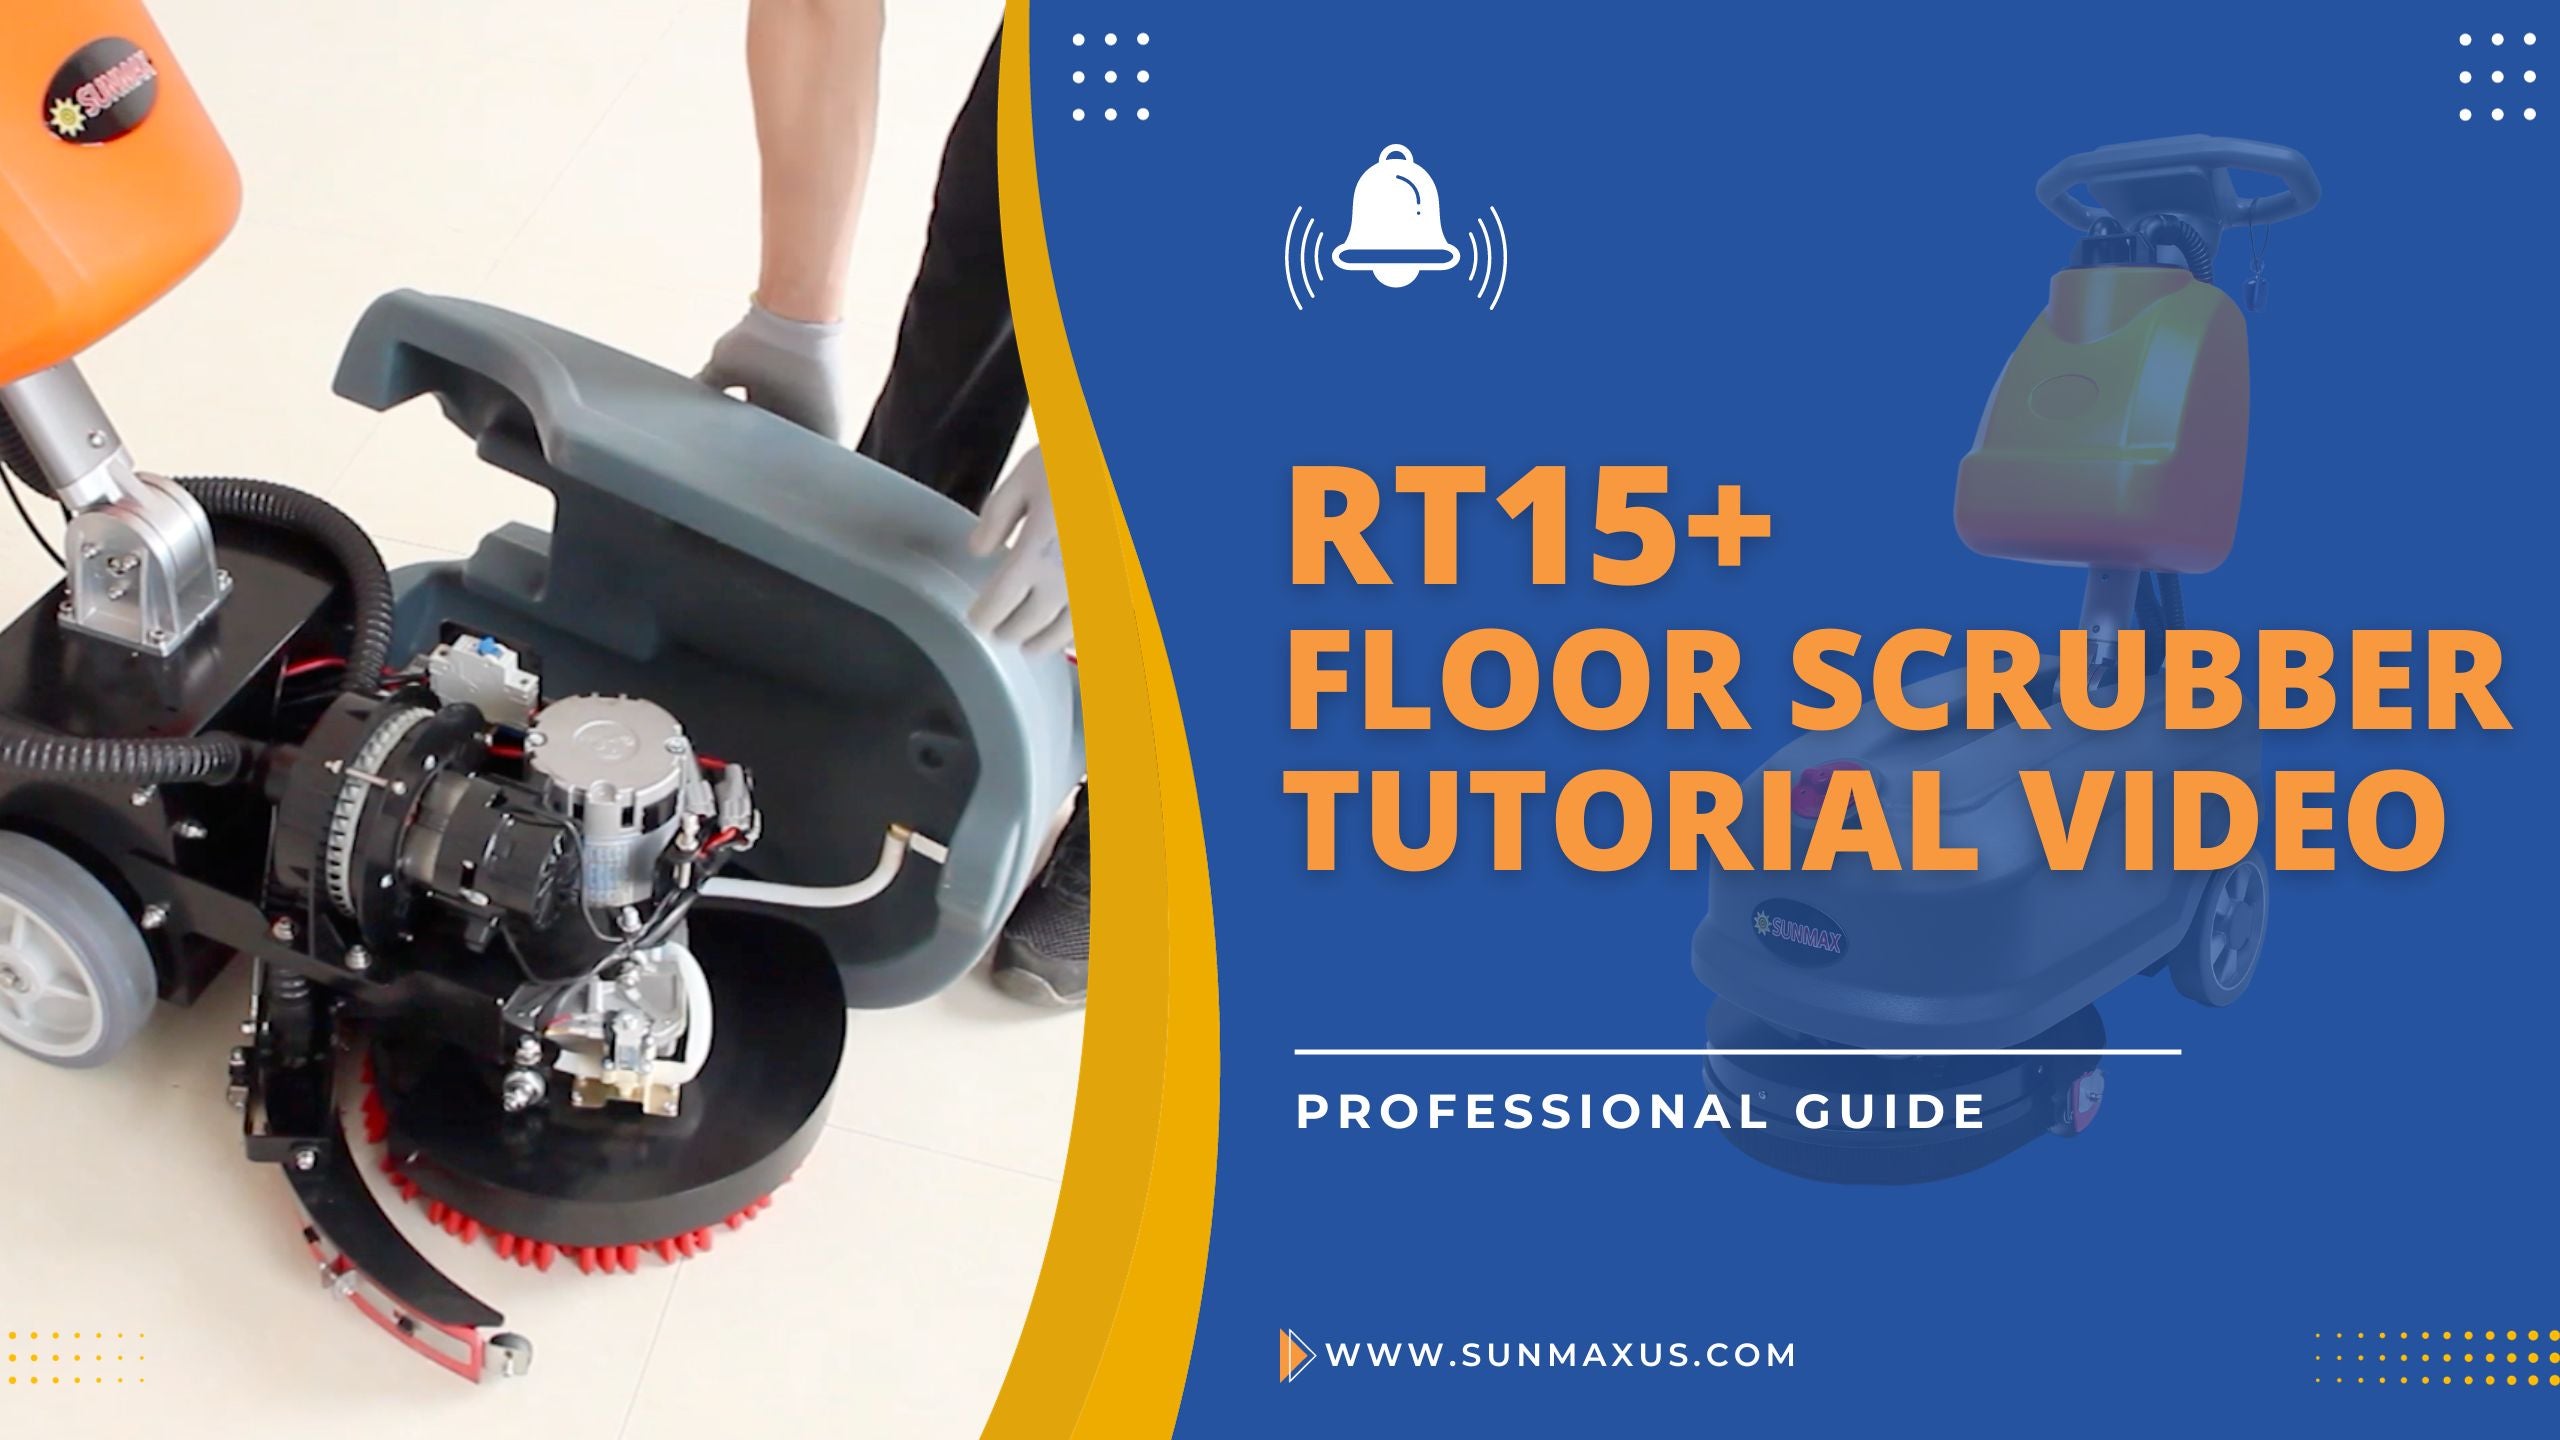 Load video: How to use RT15 floor scrubber